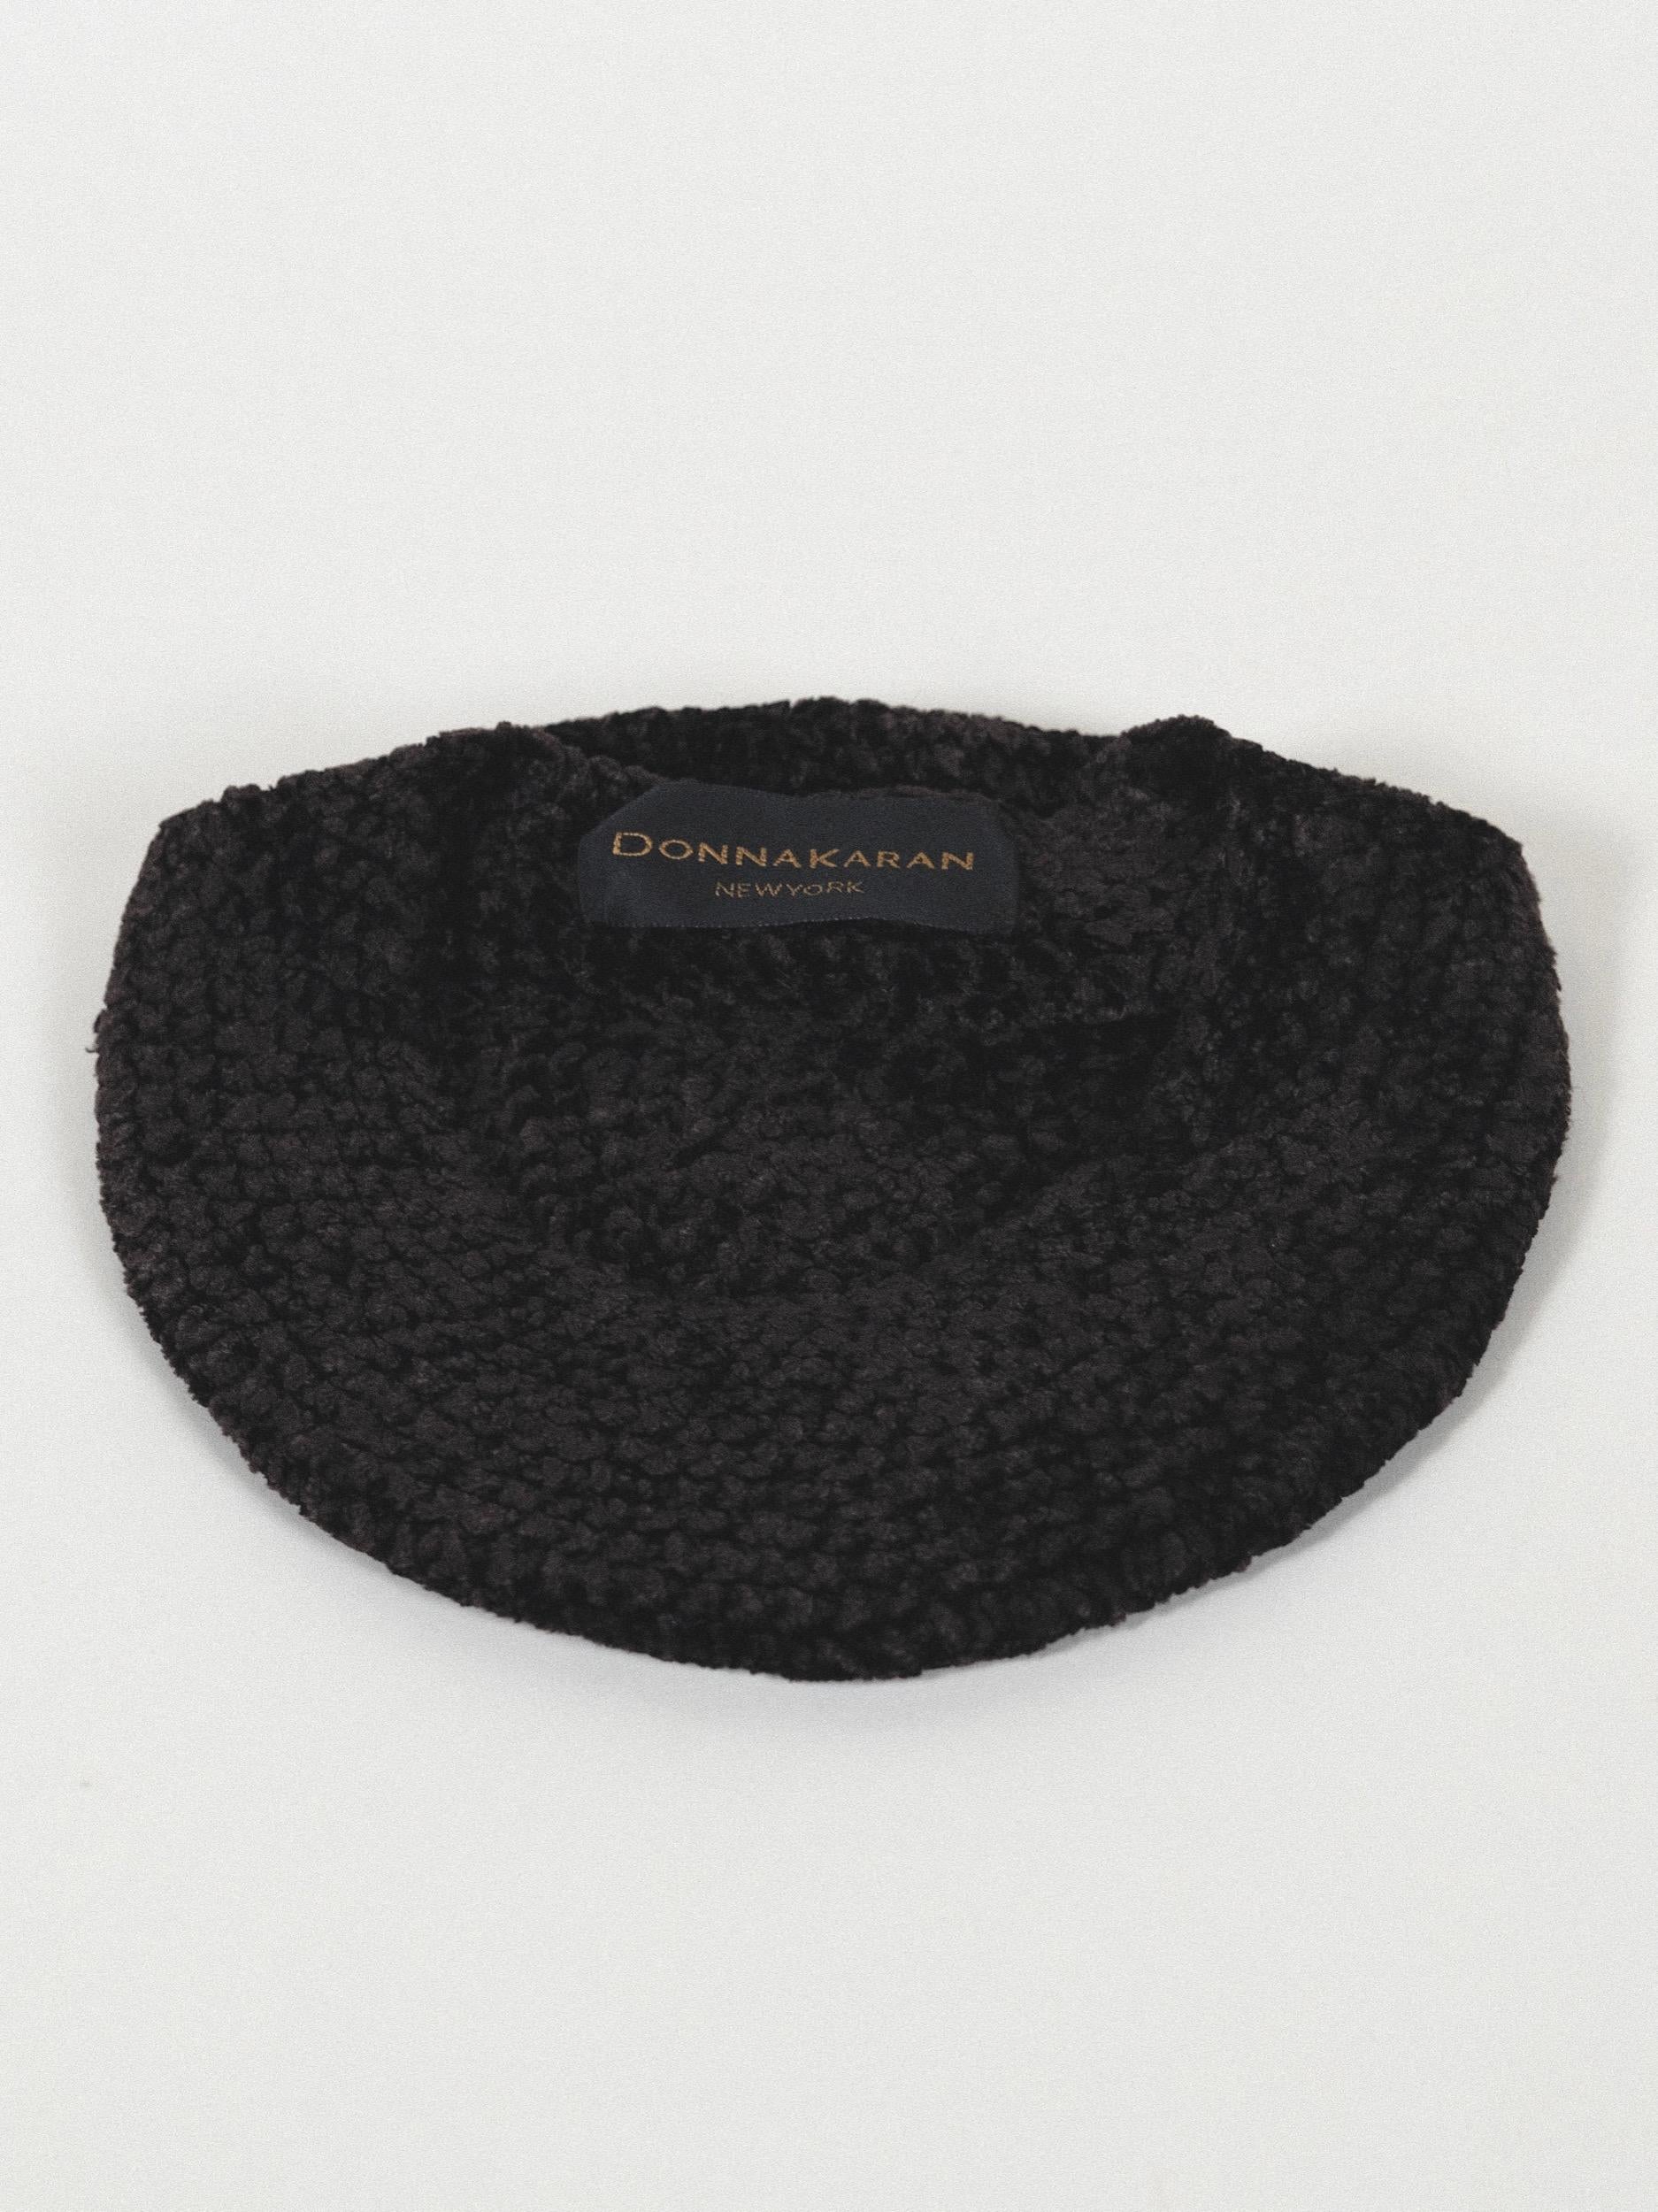 Brown/Black Donna Karan Chenille Beret Hat Fall Winter 1993 Documented  For Sale 8